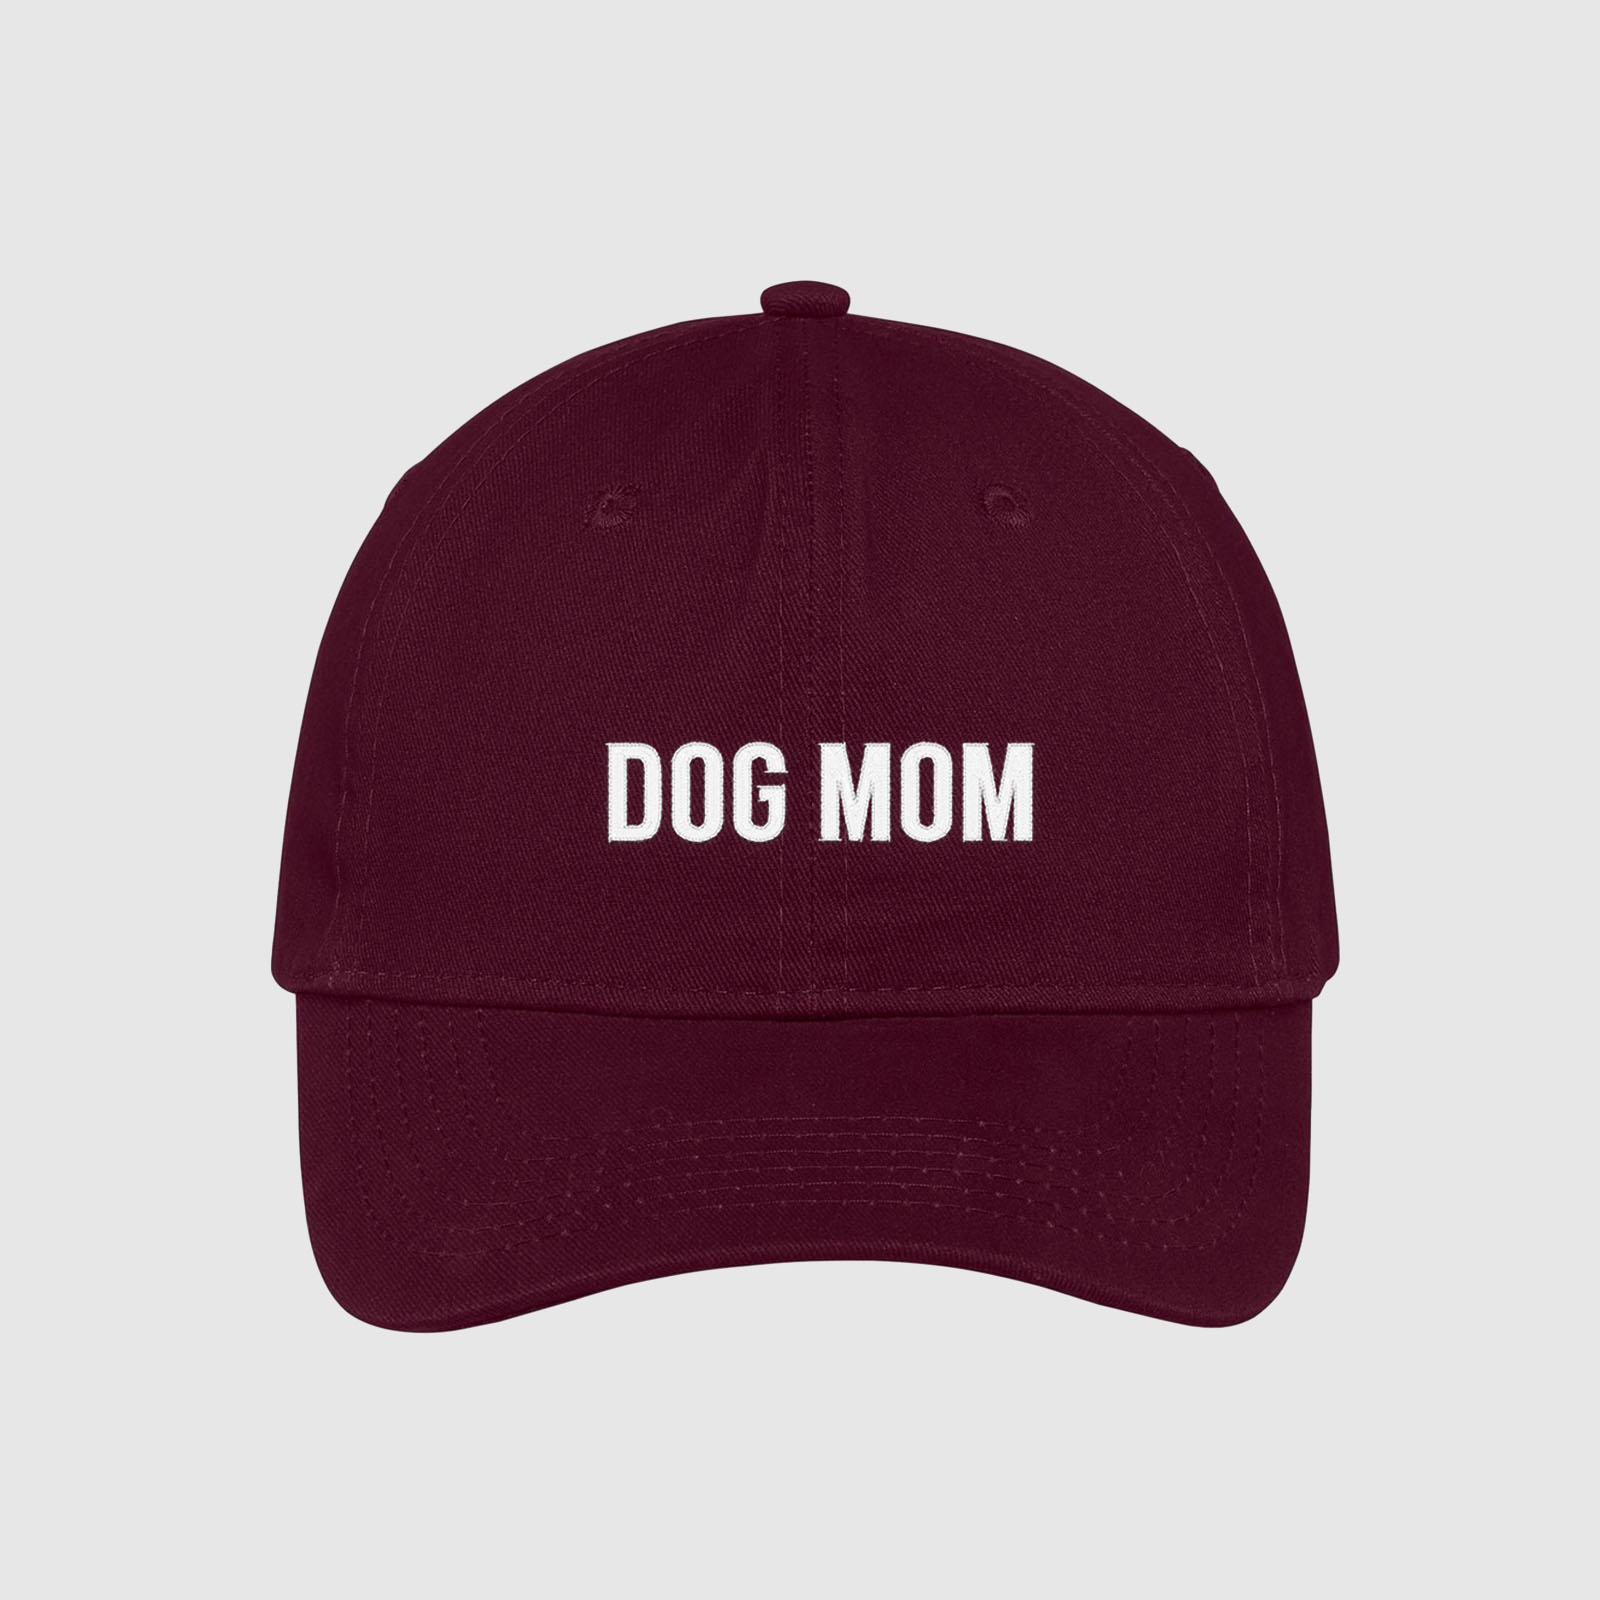 Maroon Dog Mom Hat embroidered with white text.